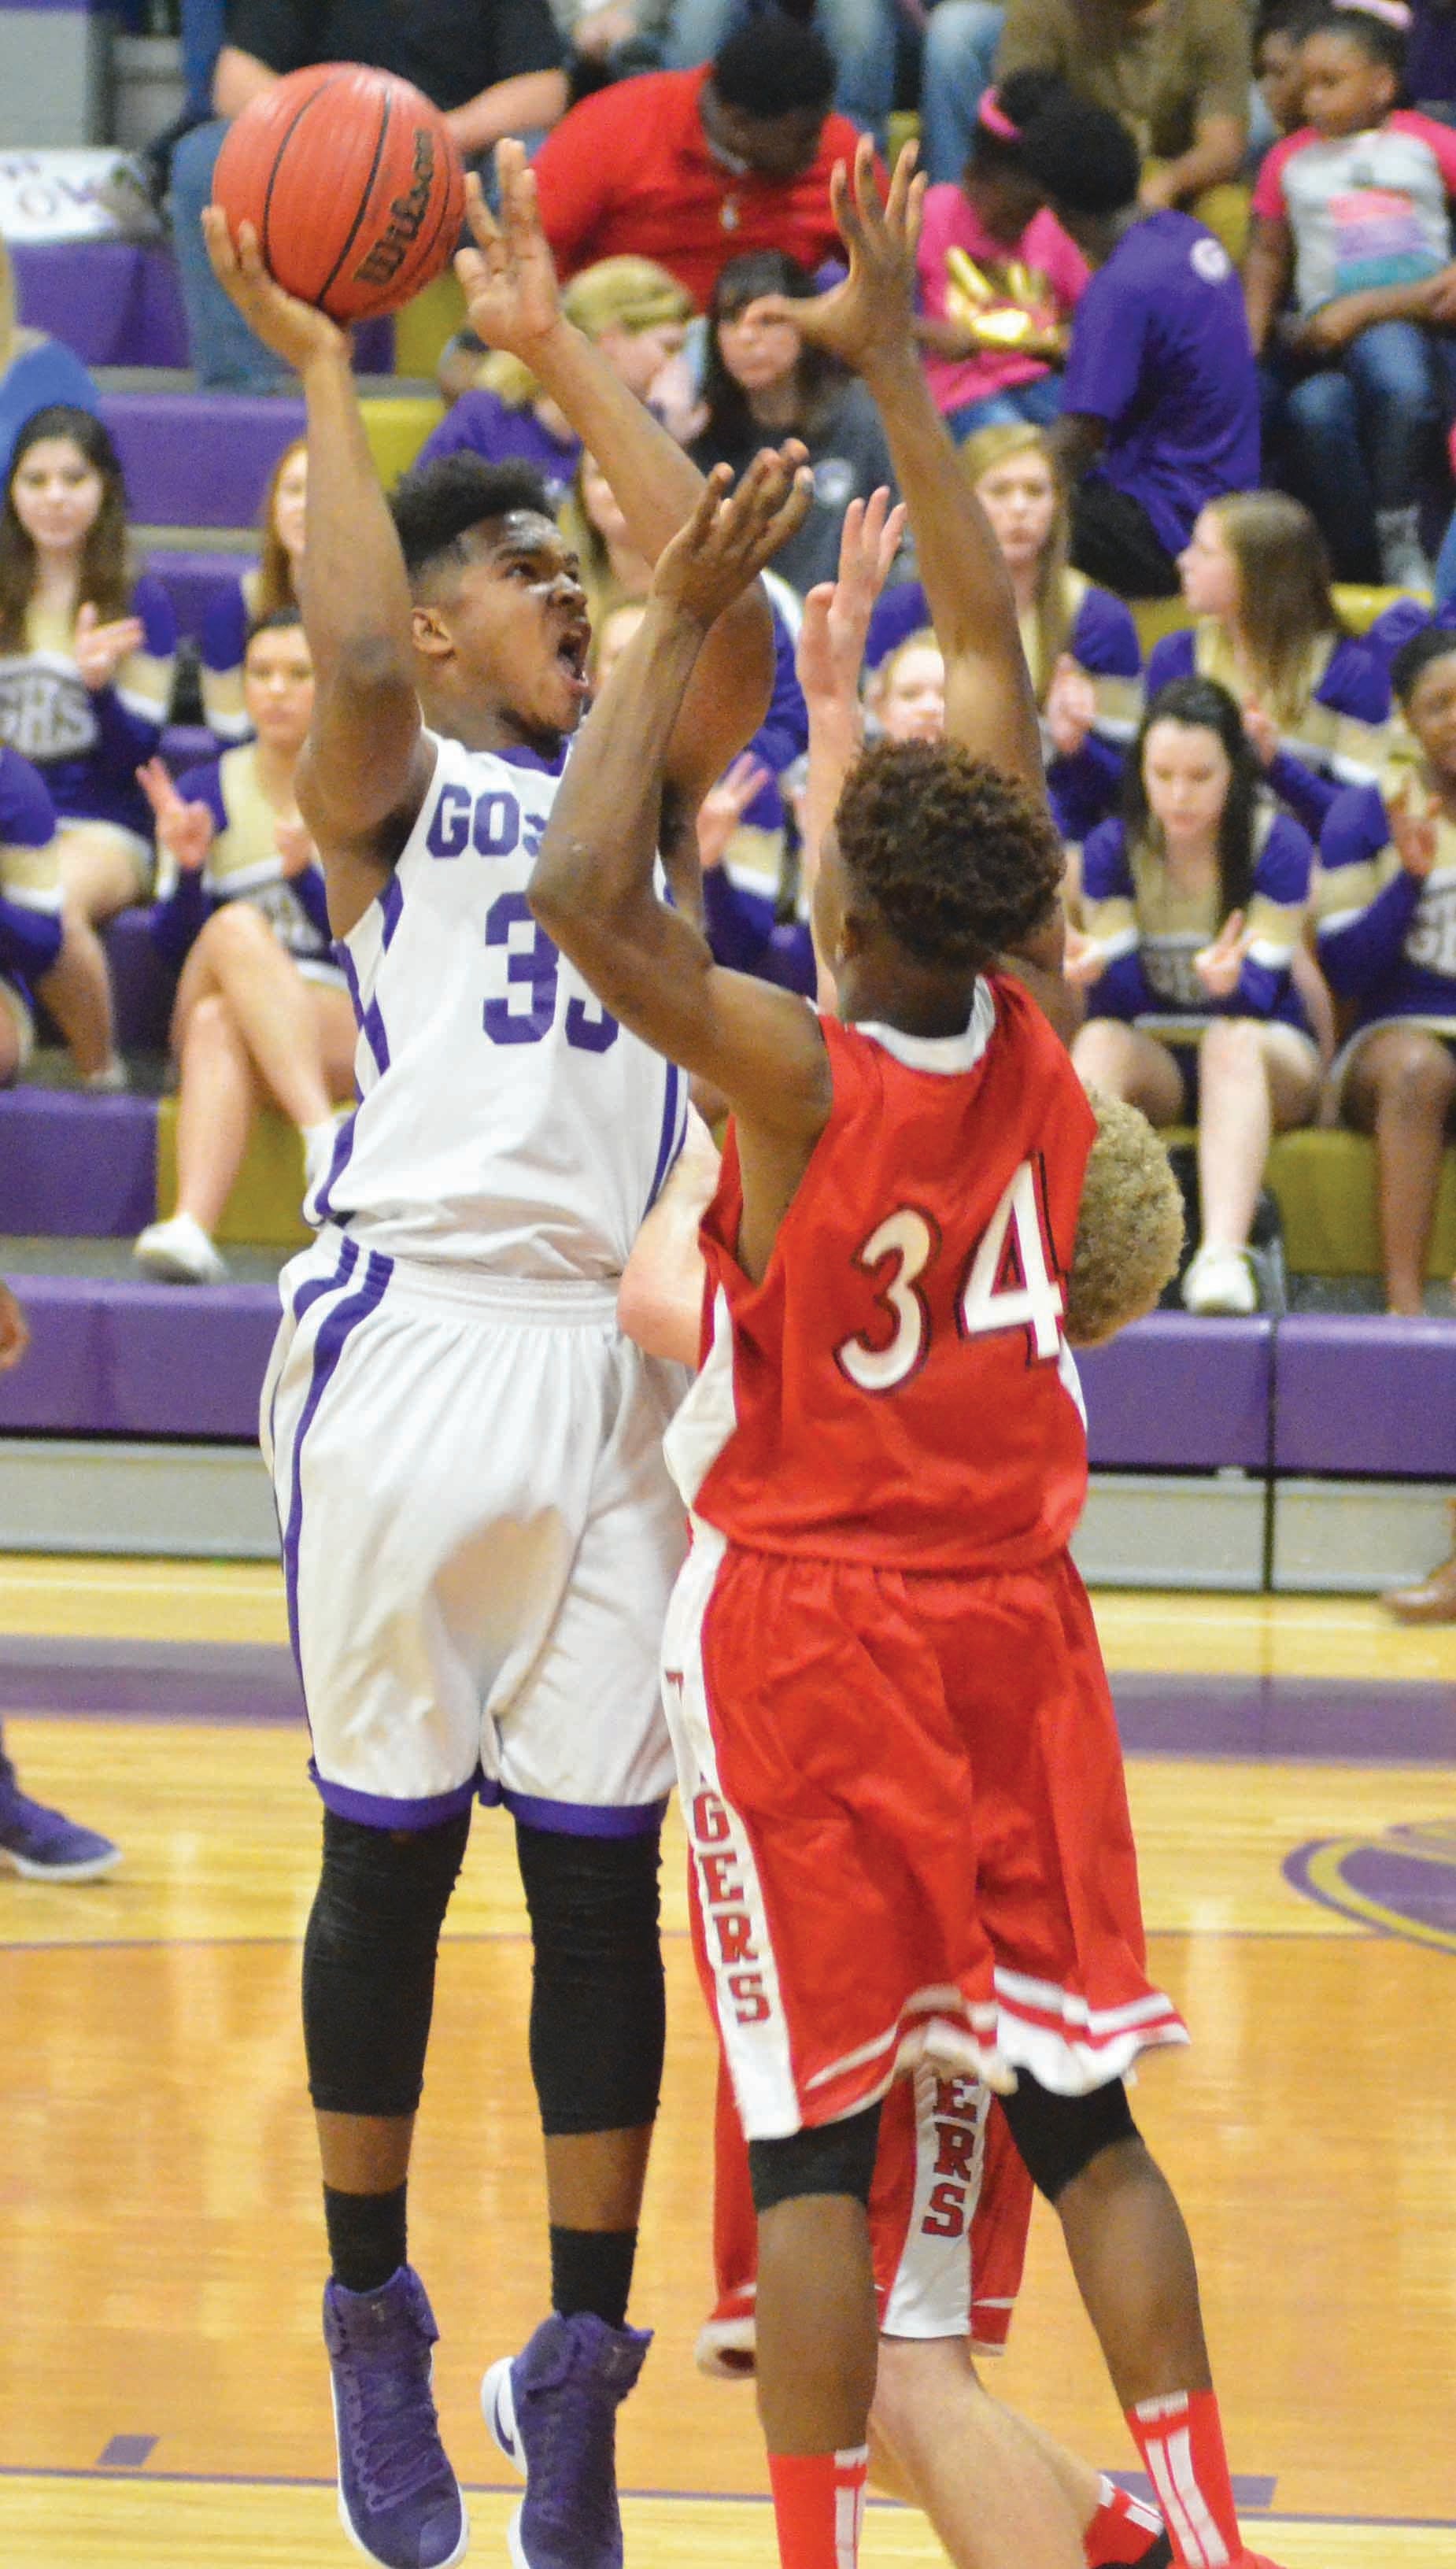 Messenger Photo/mike hensley The Goshen boys basketball team defeated Luverne 61-37 on Friday to go 1-0 in area play.